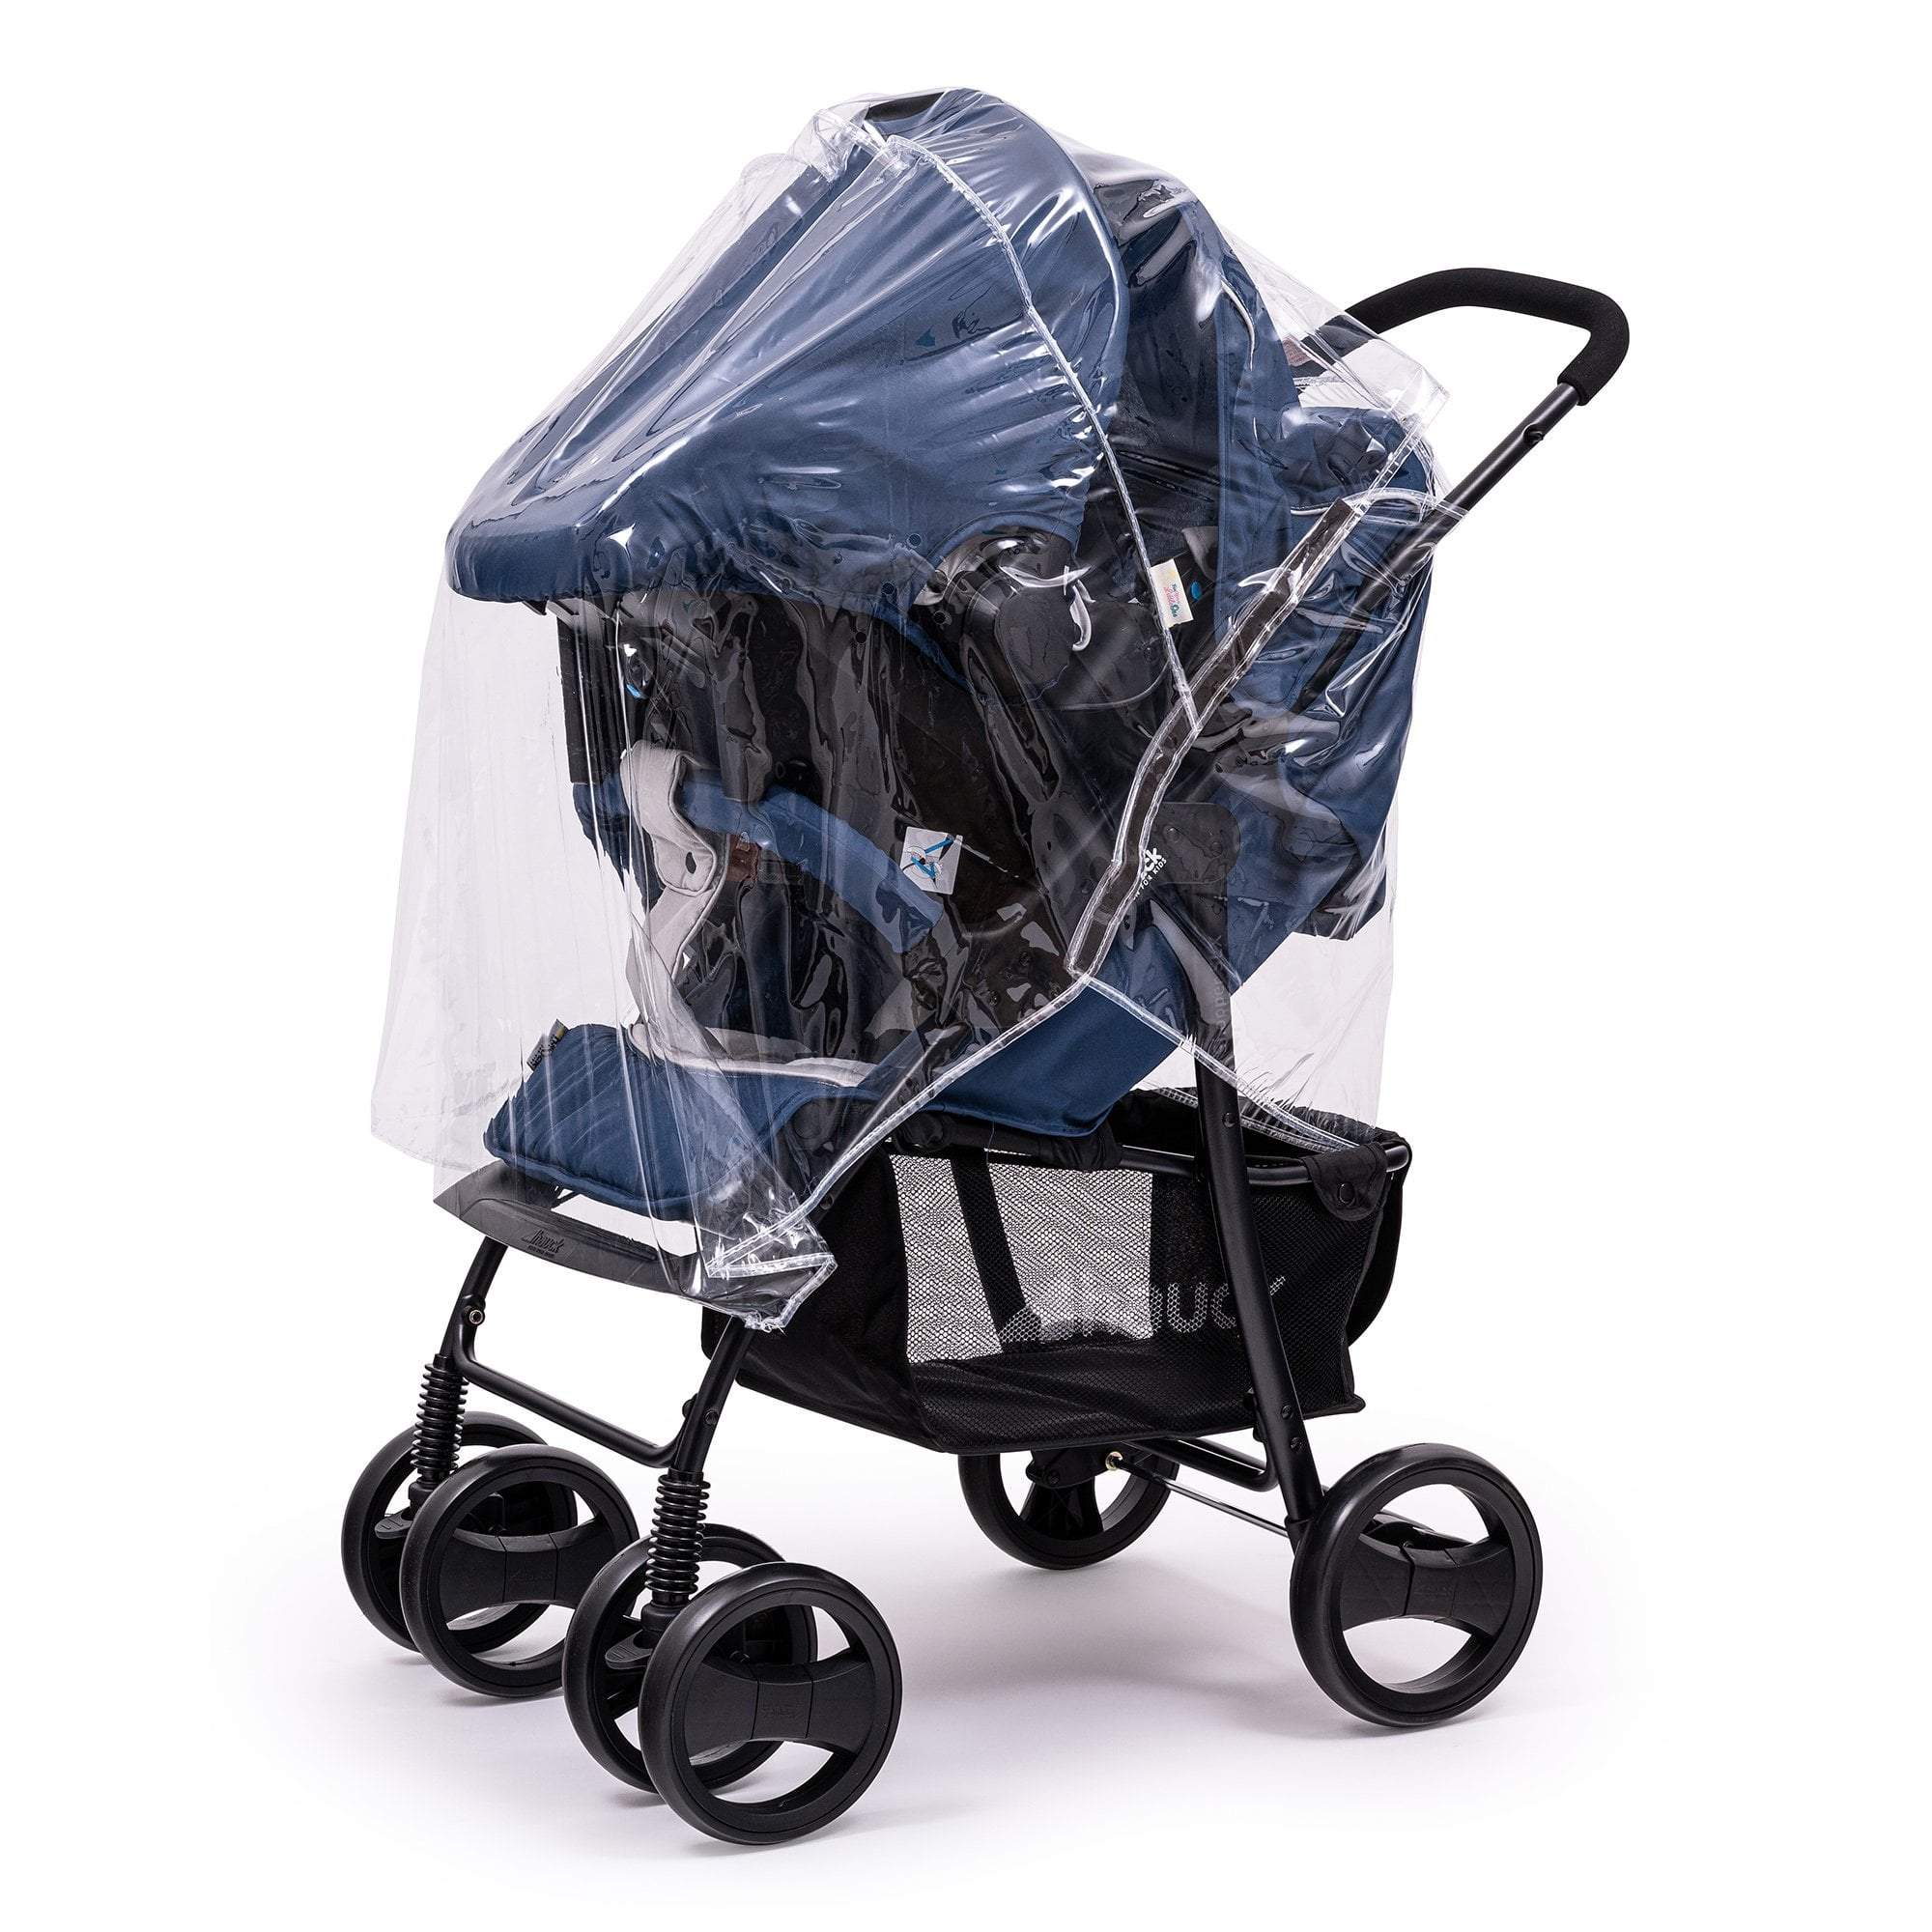 Travel System Raincover Compatible with Venicci - Fits All Models - For Your Little One